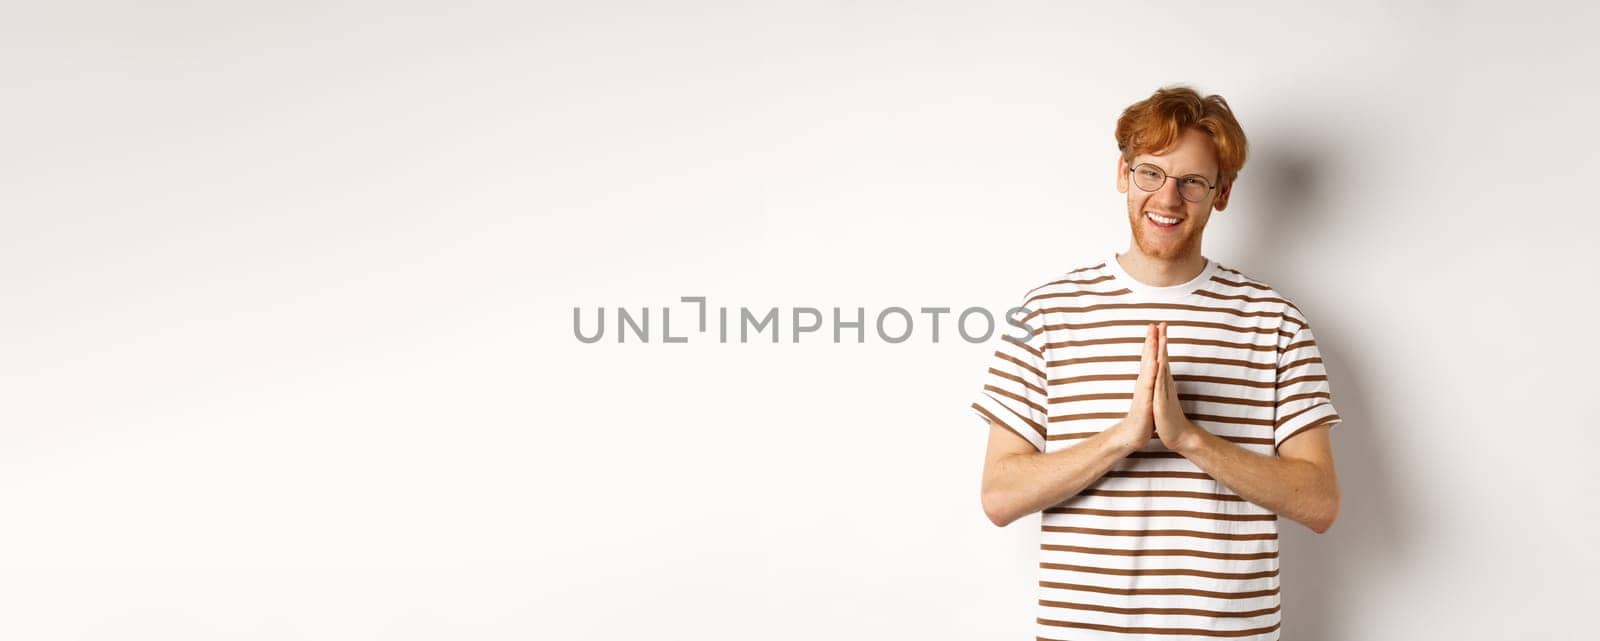 Handsome young man in glasses, red hair, showing namaste gesture and smiling, thanking you, standing grateful over white background.